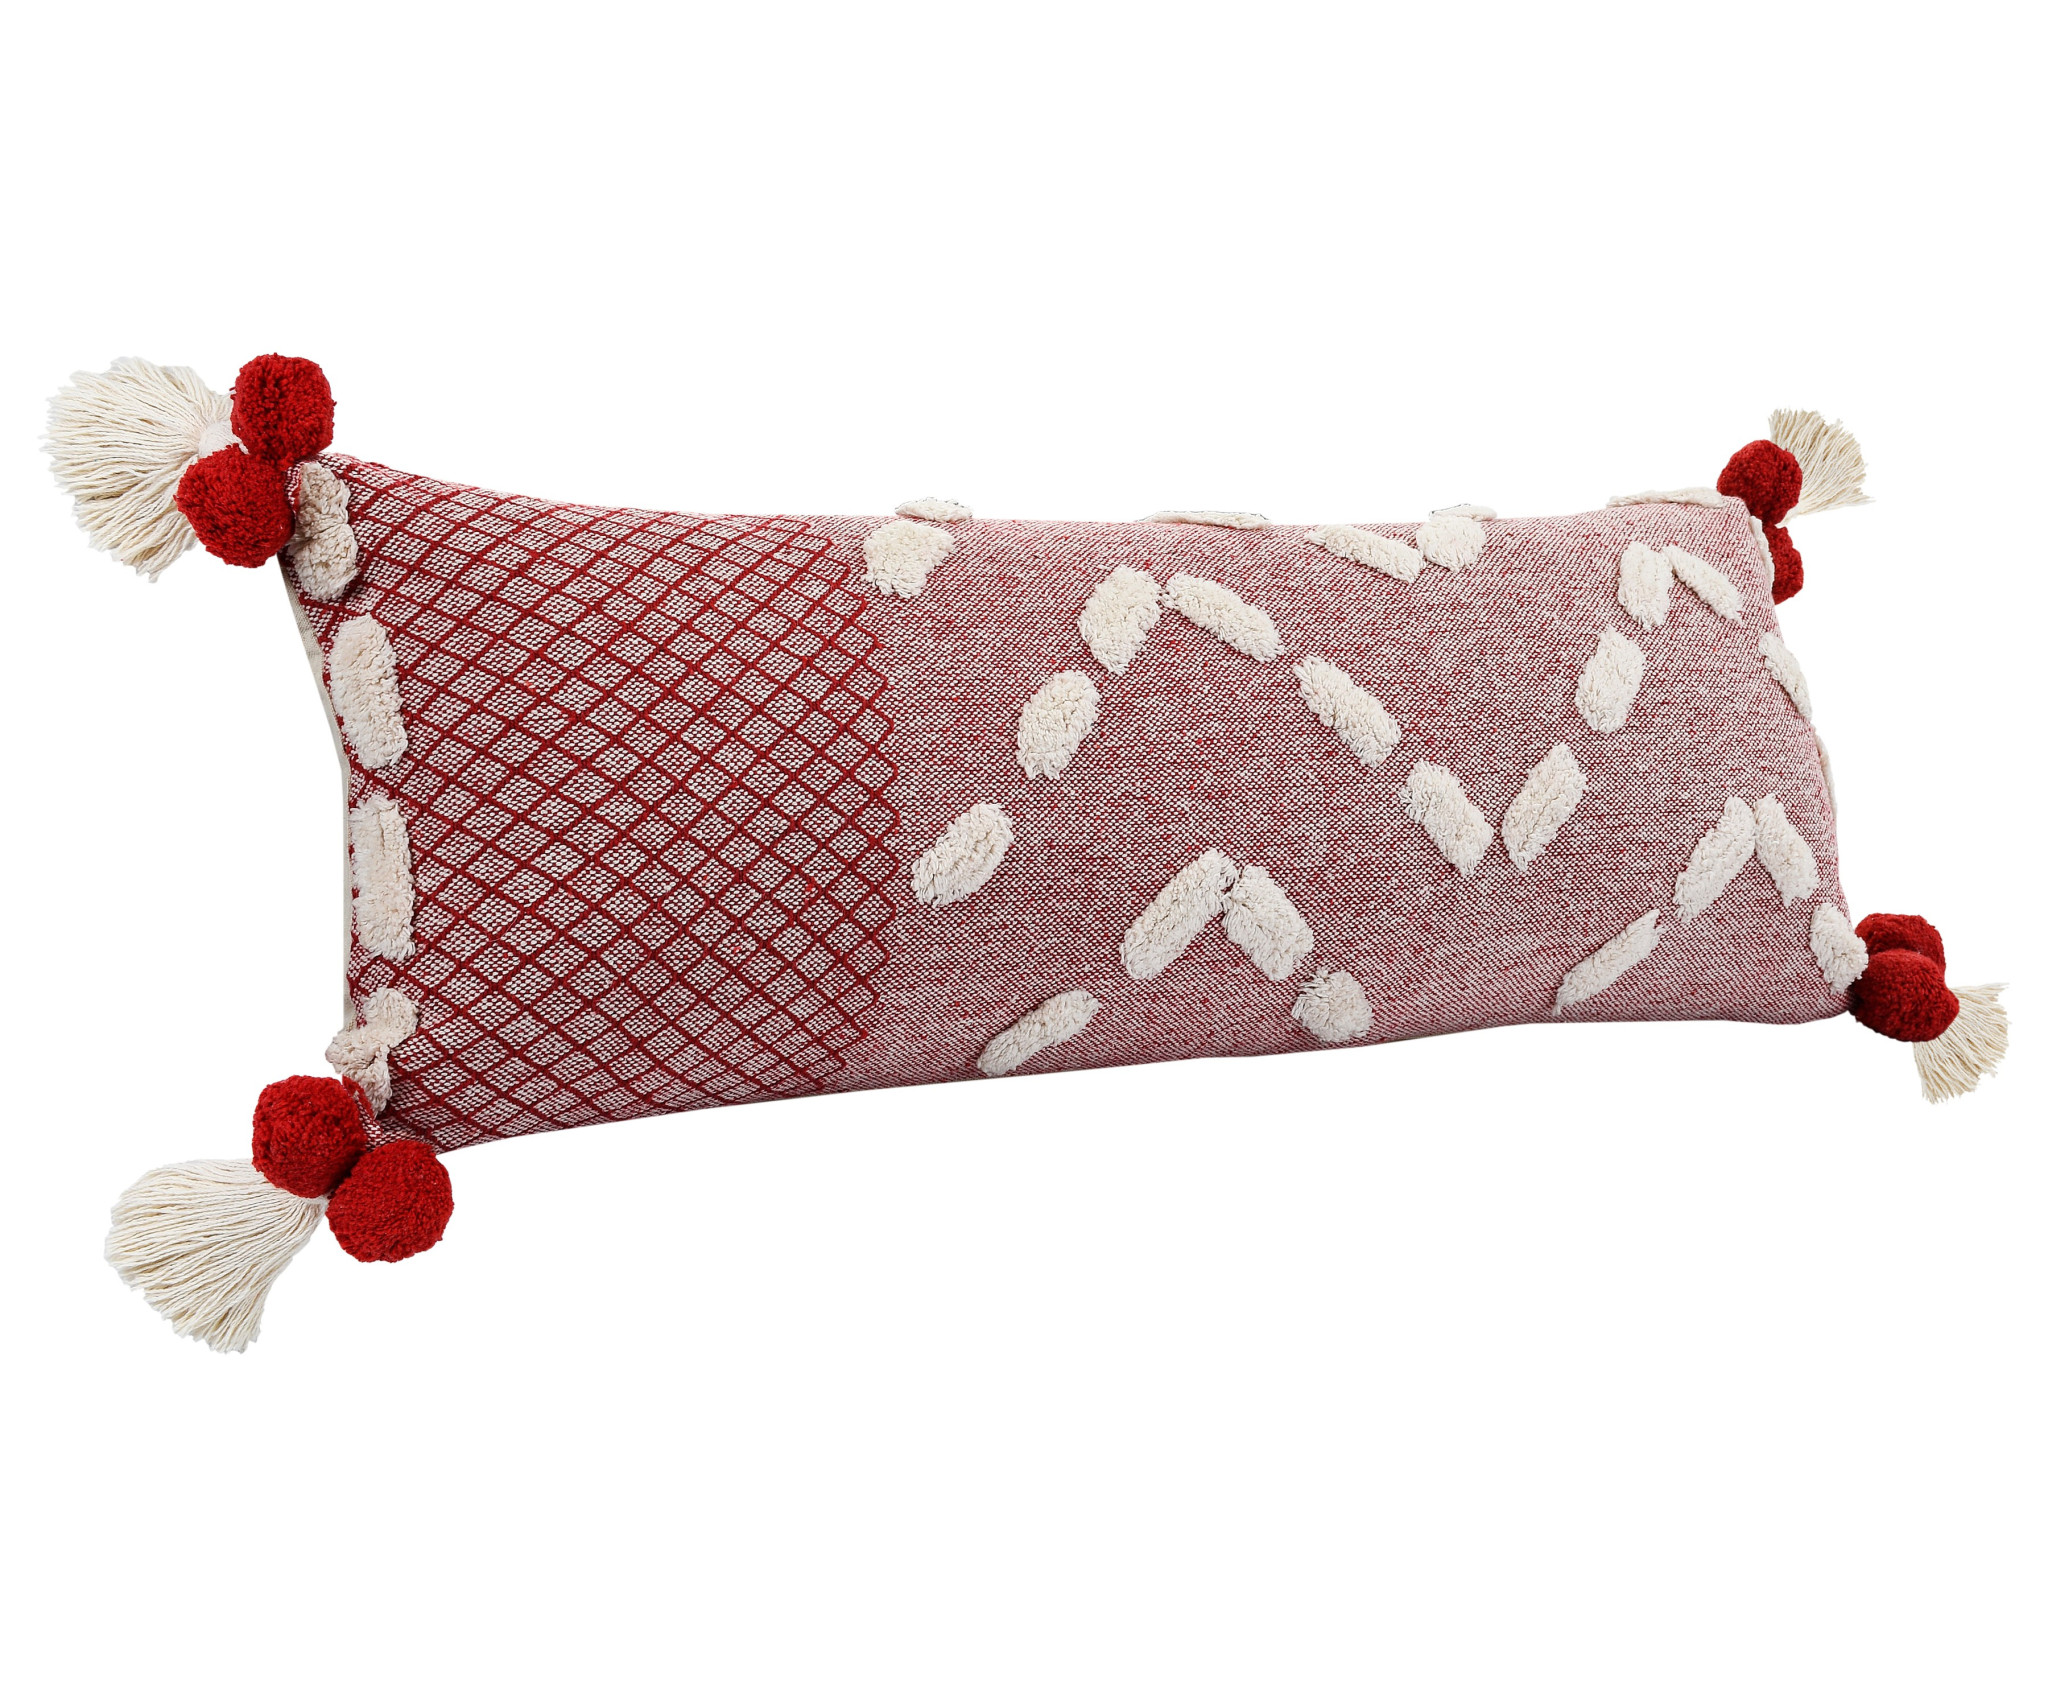 14" X 36" Heute Red And Cream 100% Cotton Geometric Zippered Pillow-517412-1